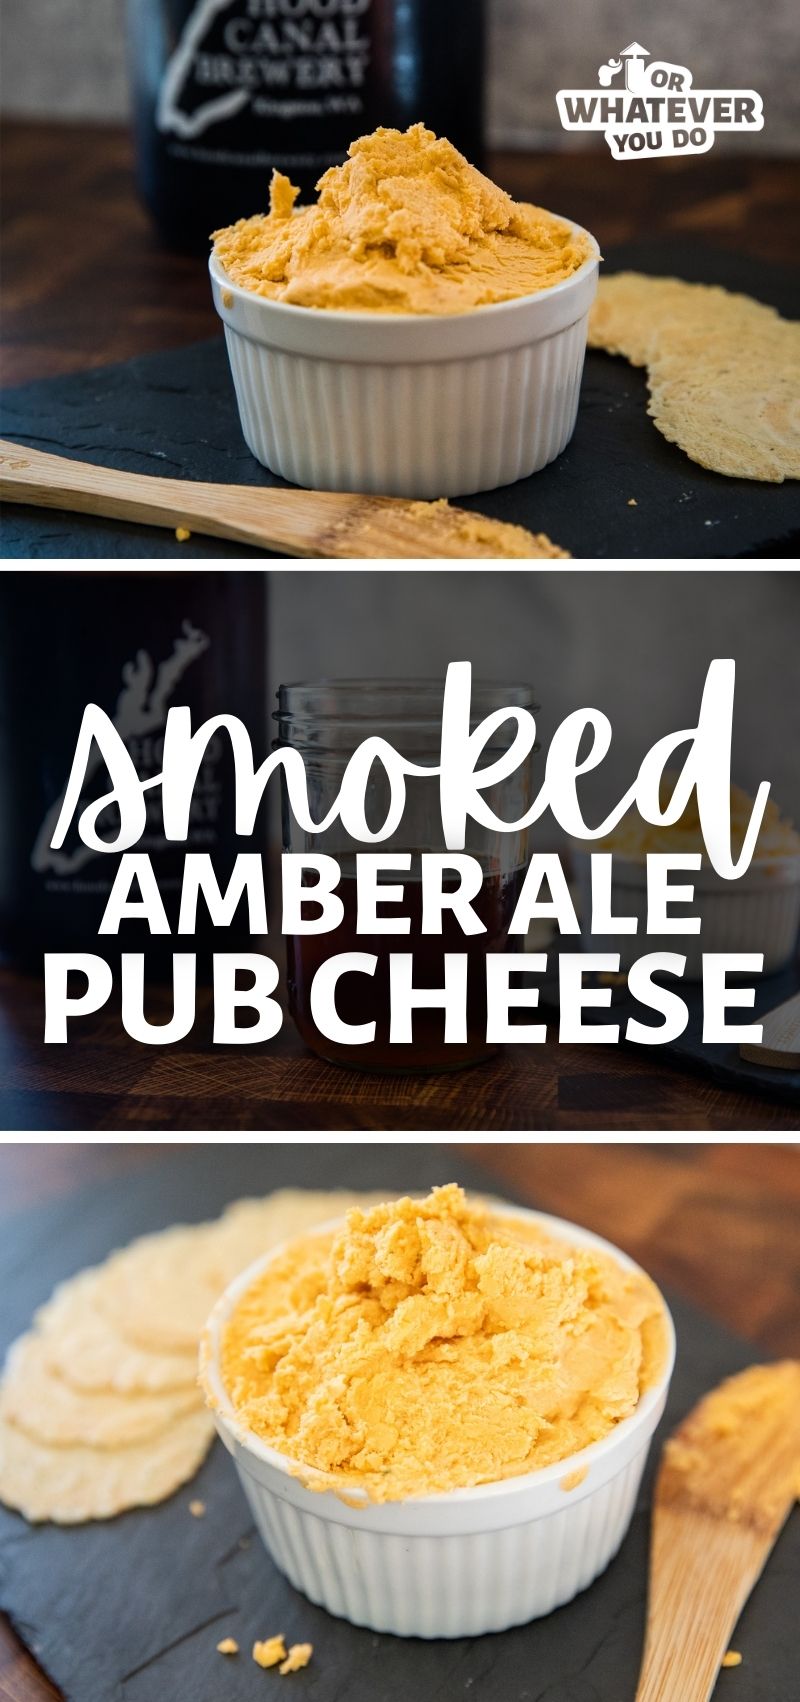 Smoked Amber Ale Pub Cheese